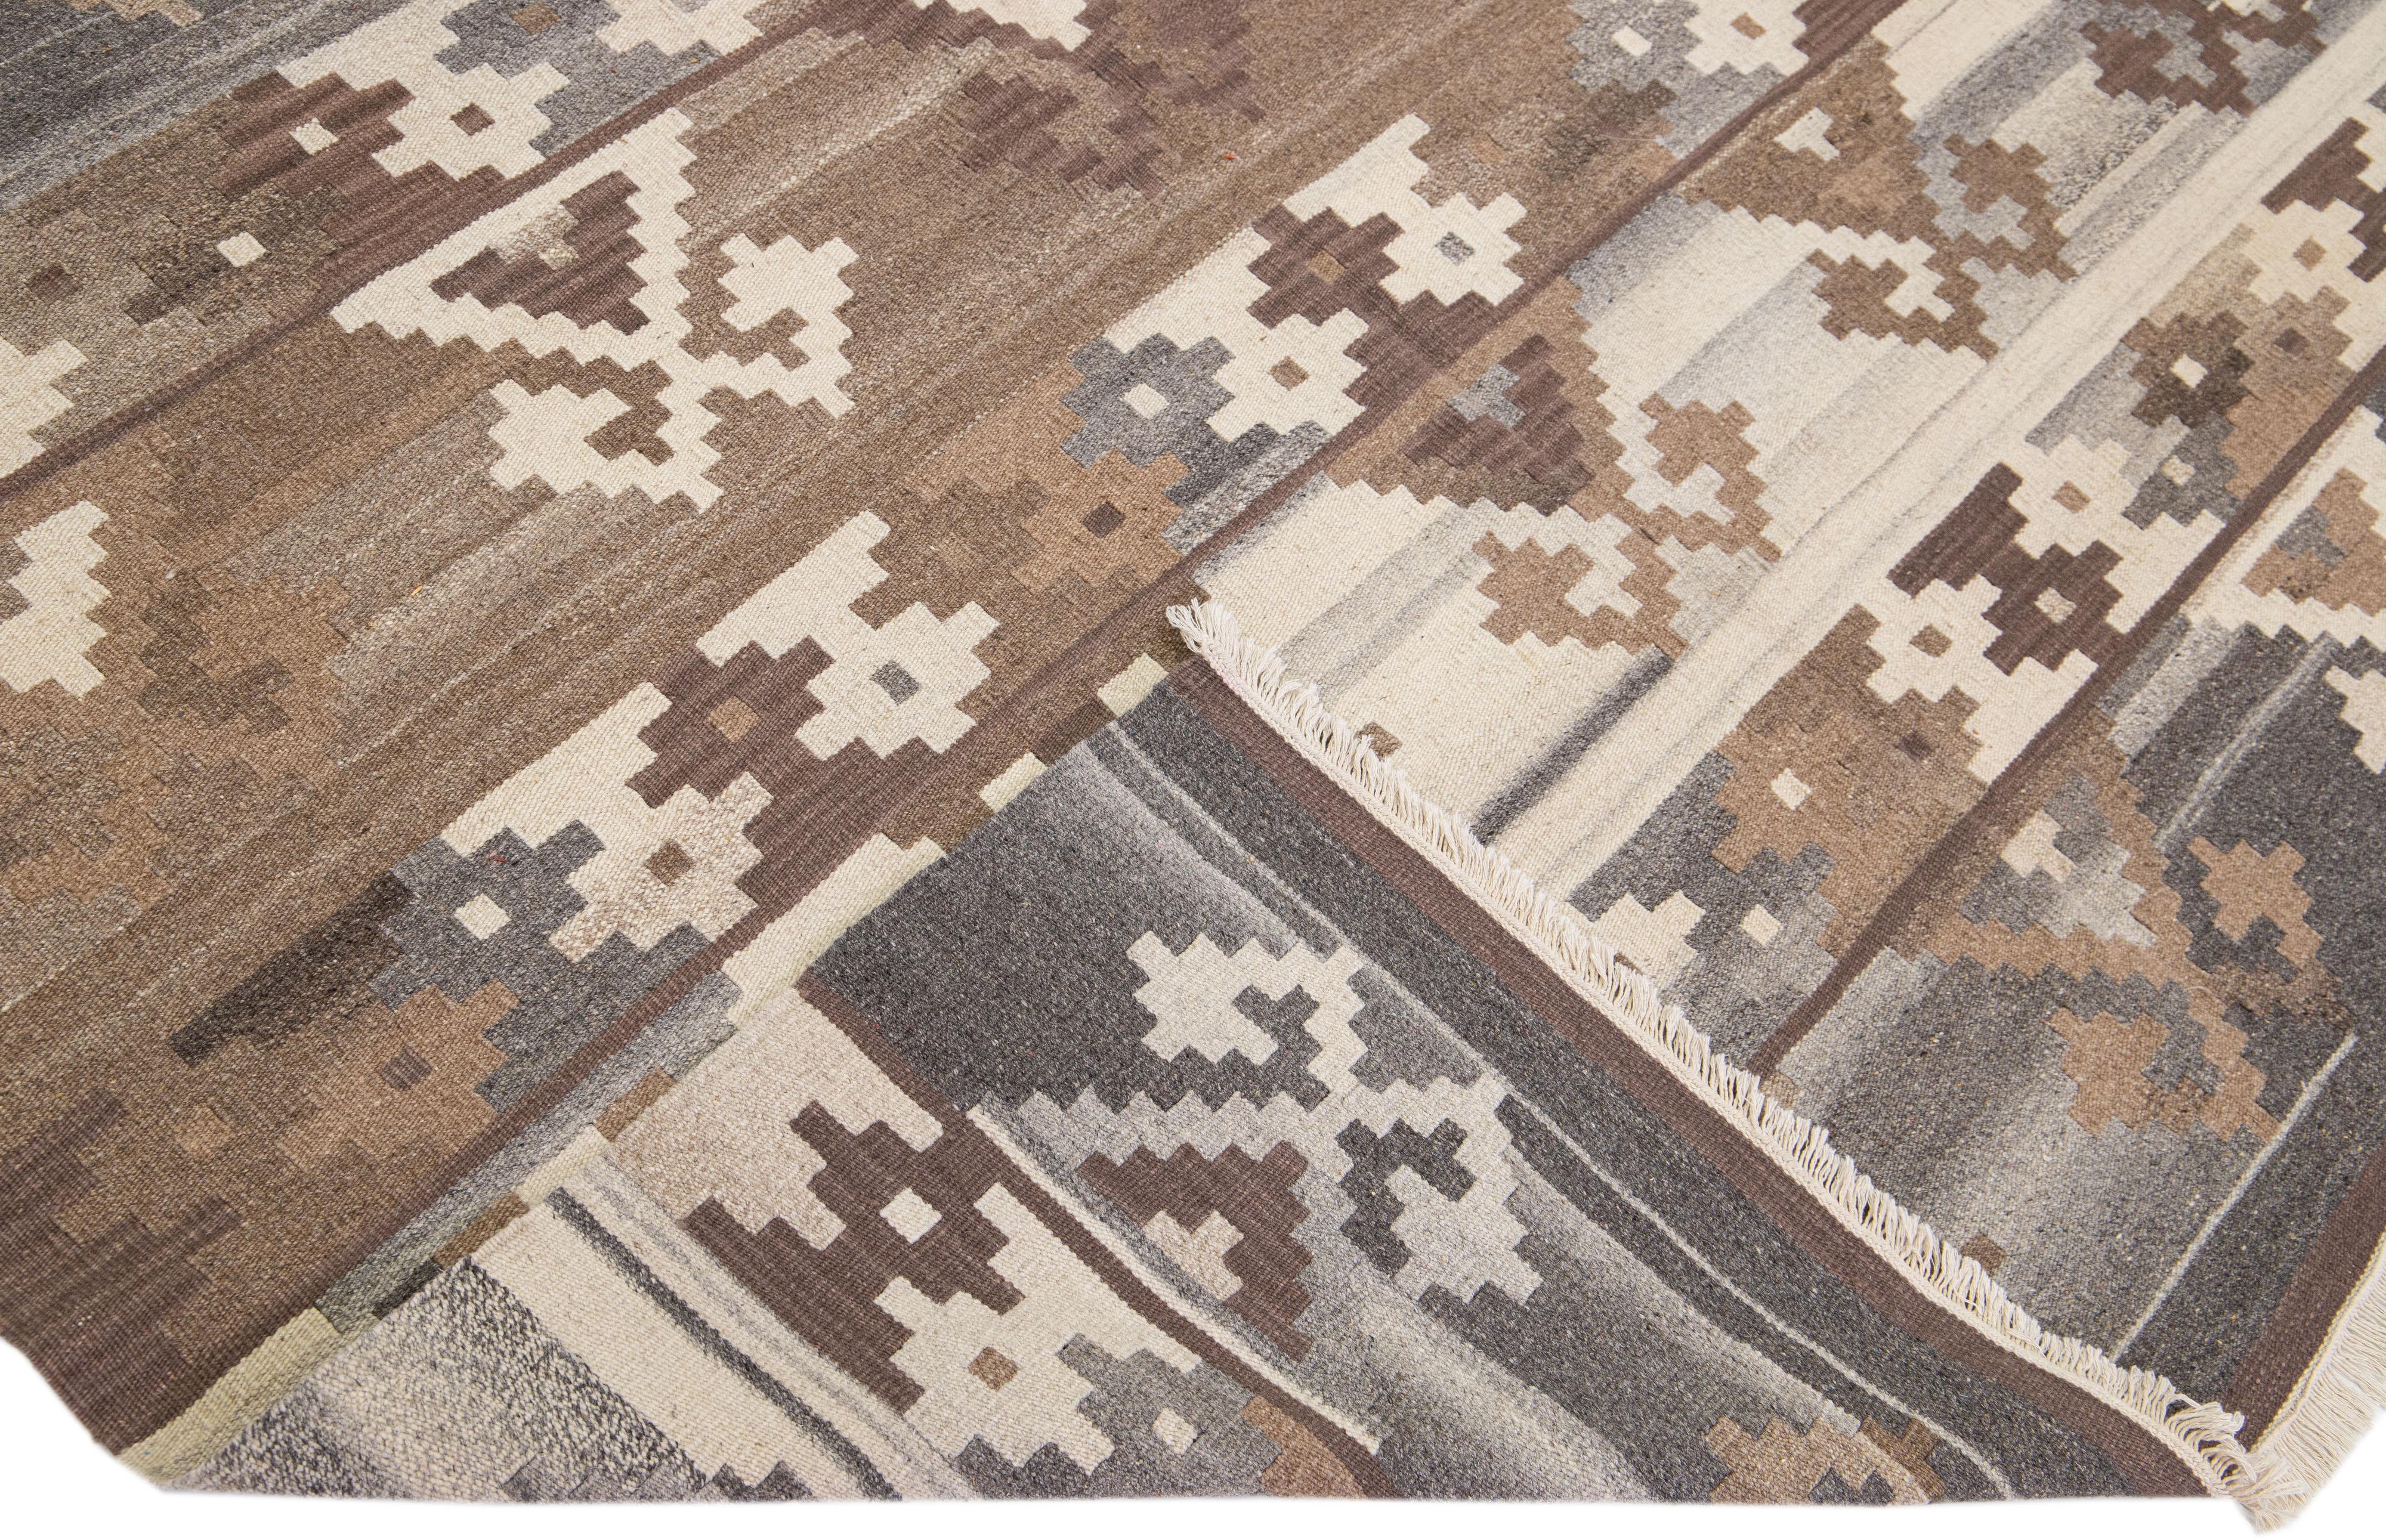 Beautiful Modern flat-weave Kilim handmade wool rug with a brown color field. This Kilim rug has gray and beige accents in a gorgeous geometric design.

This rug measures: 6'8